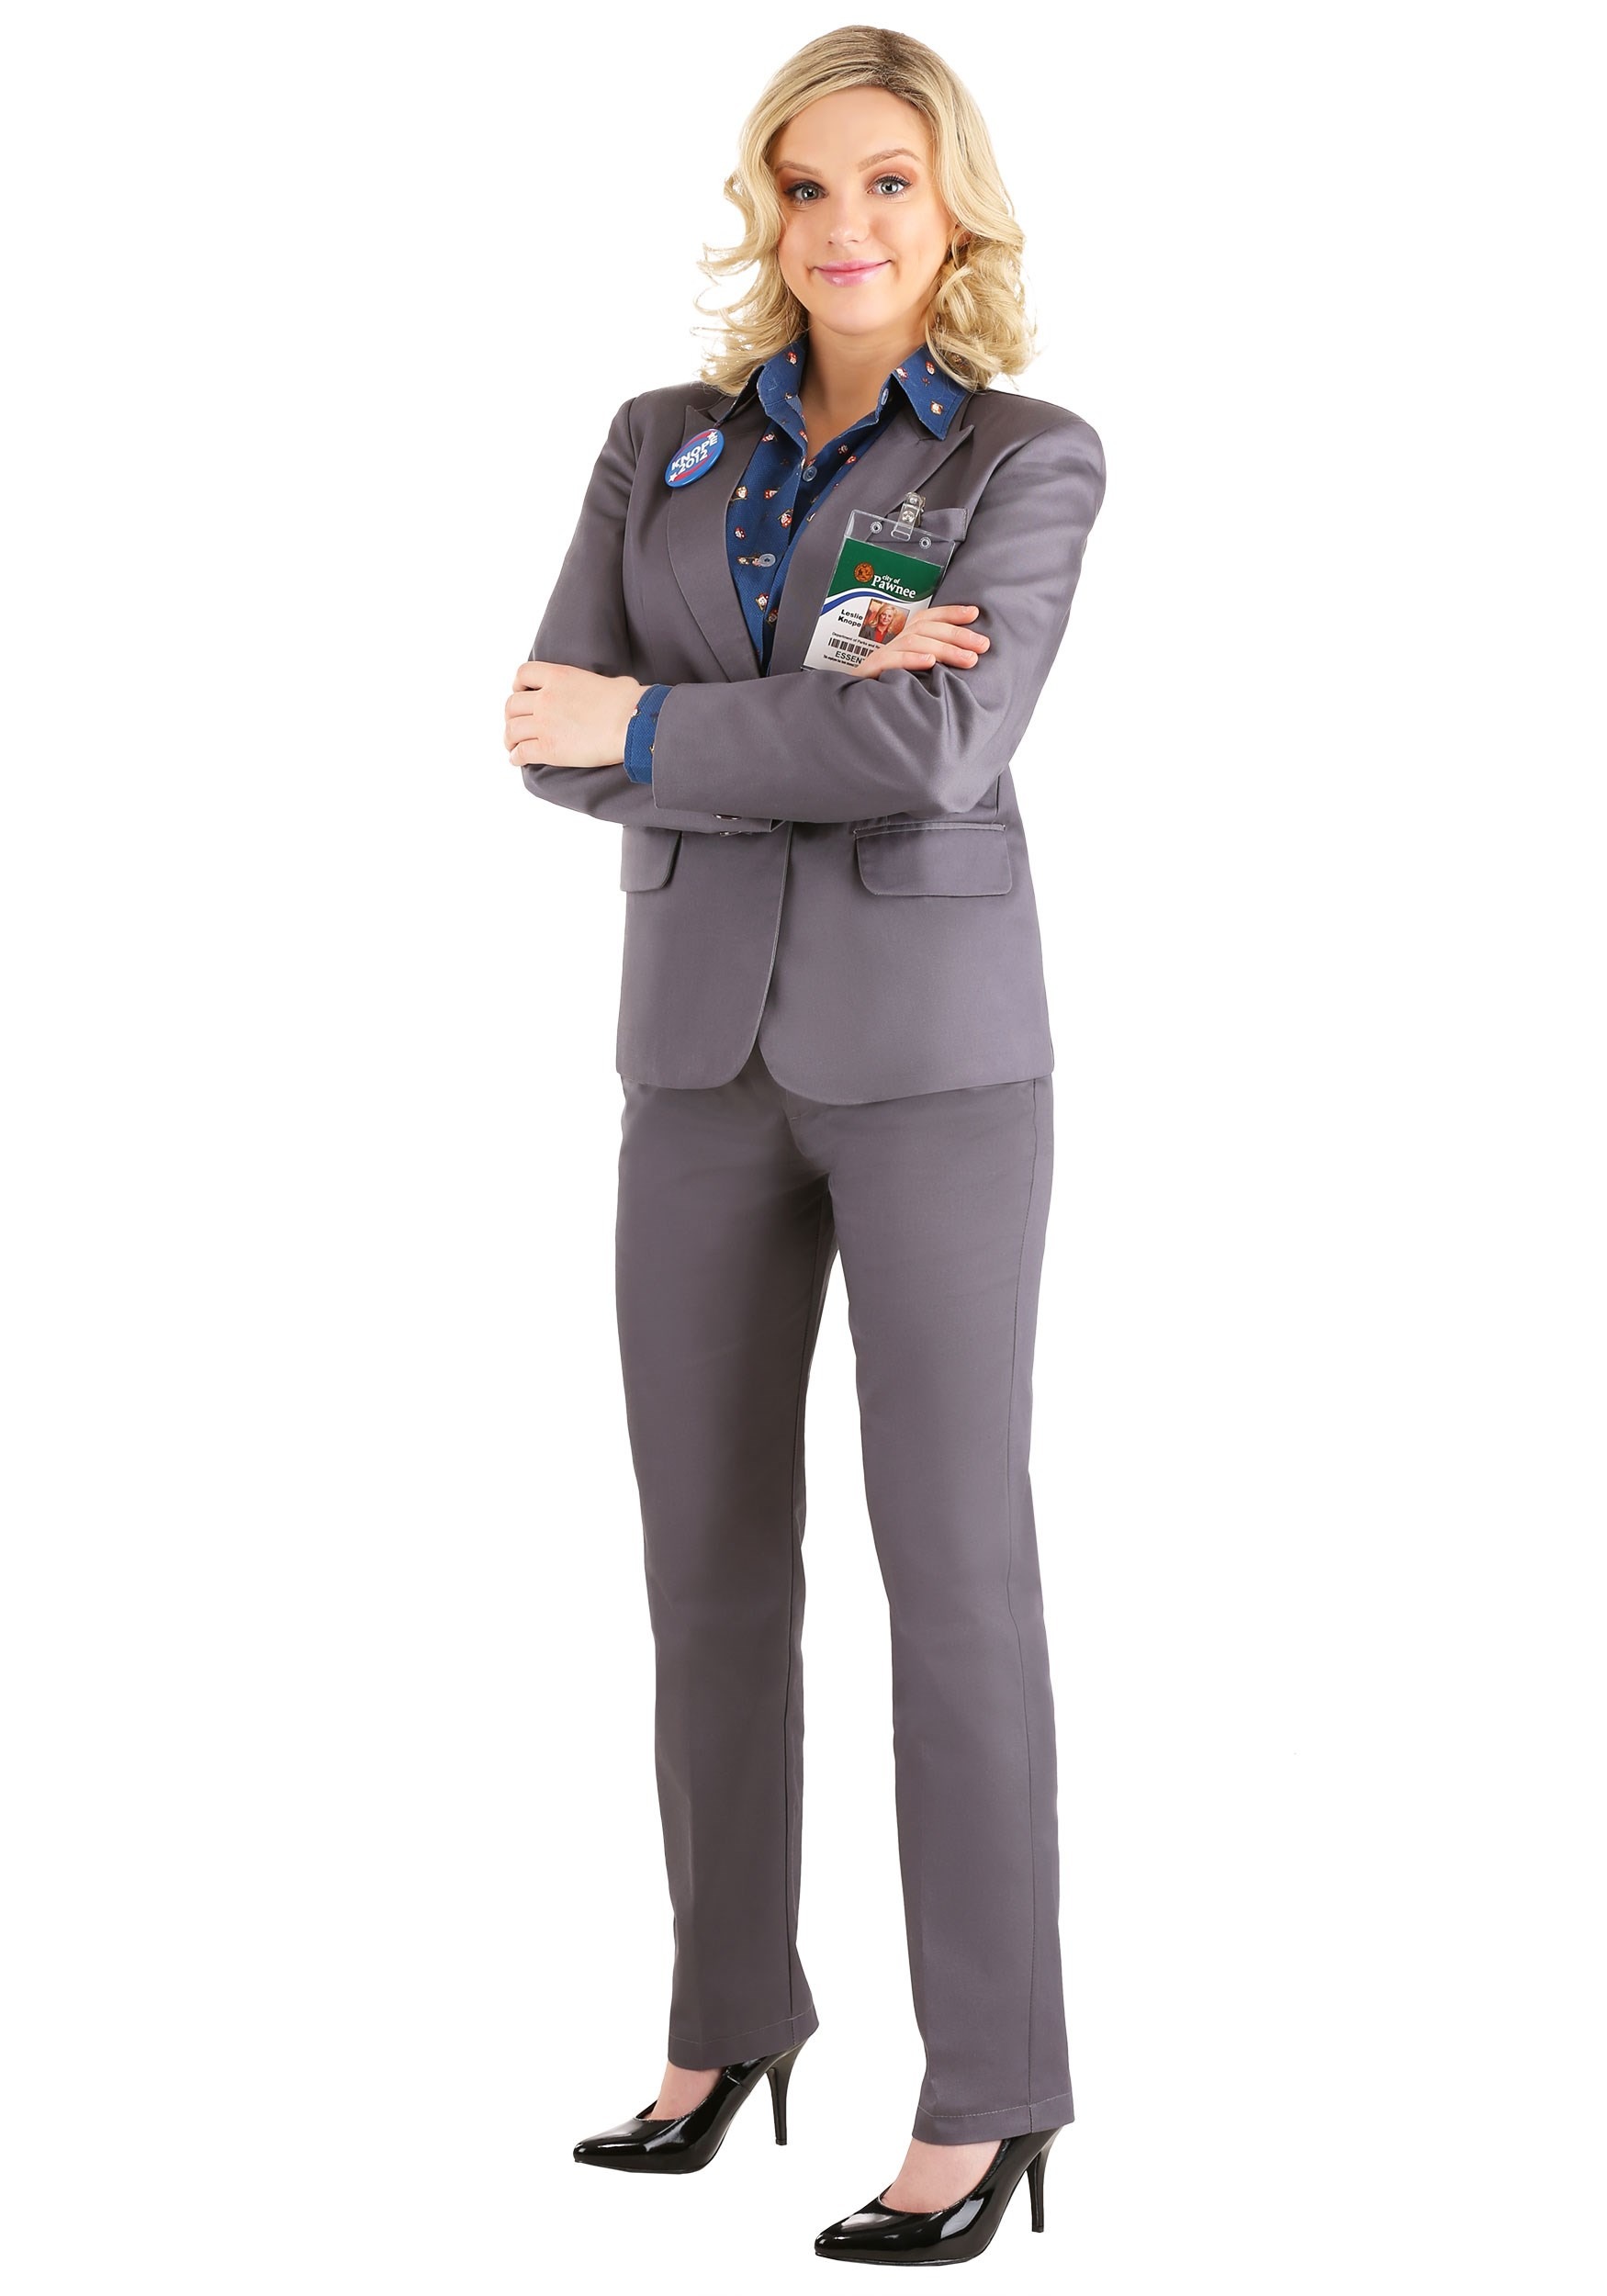 parks and recreation leslie knope costume2